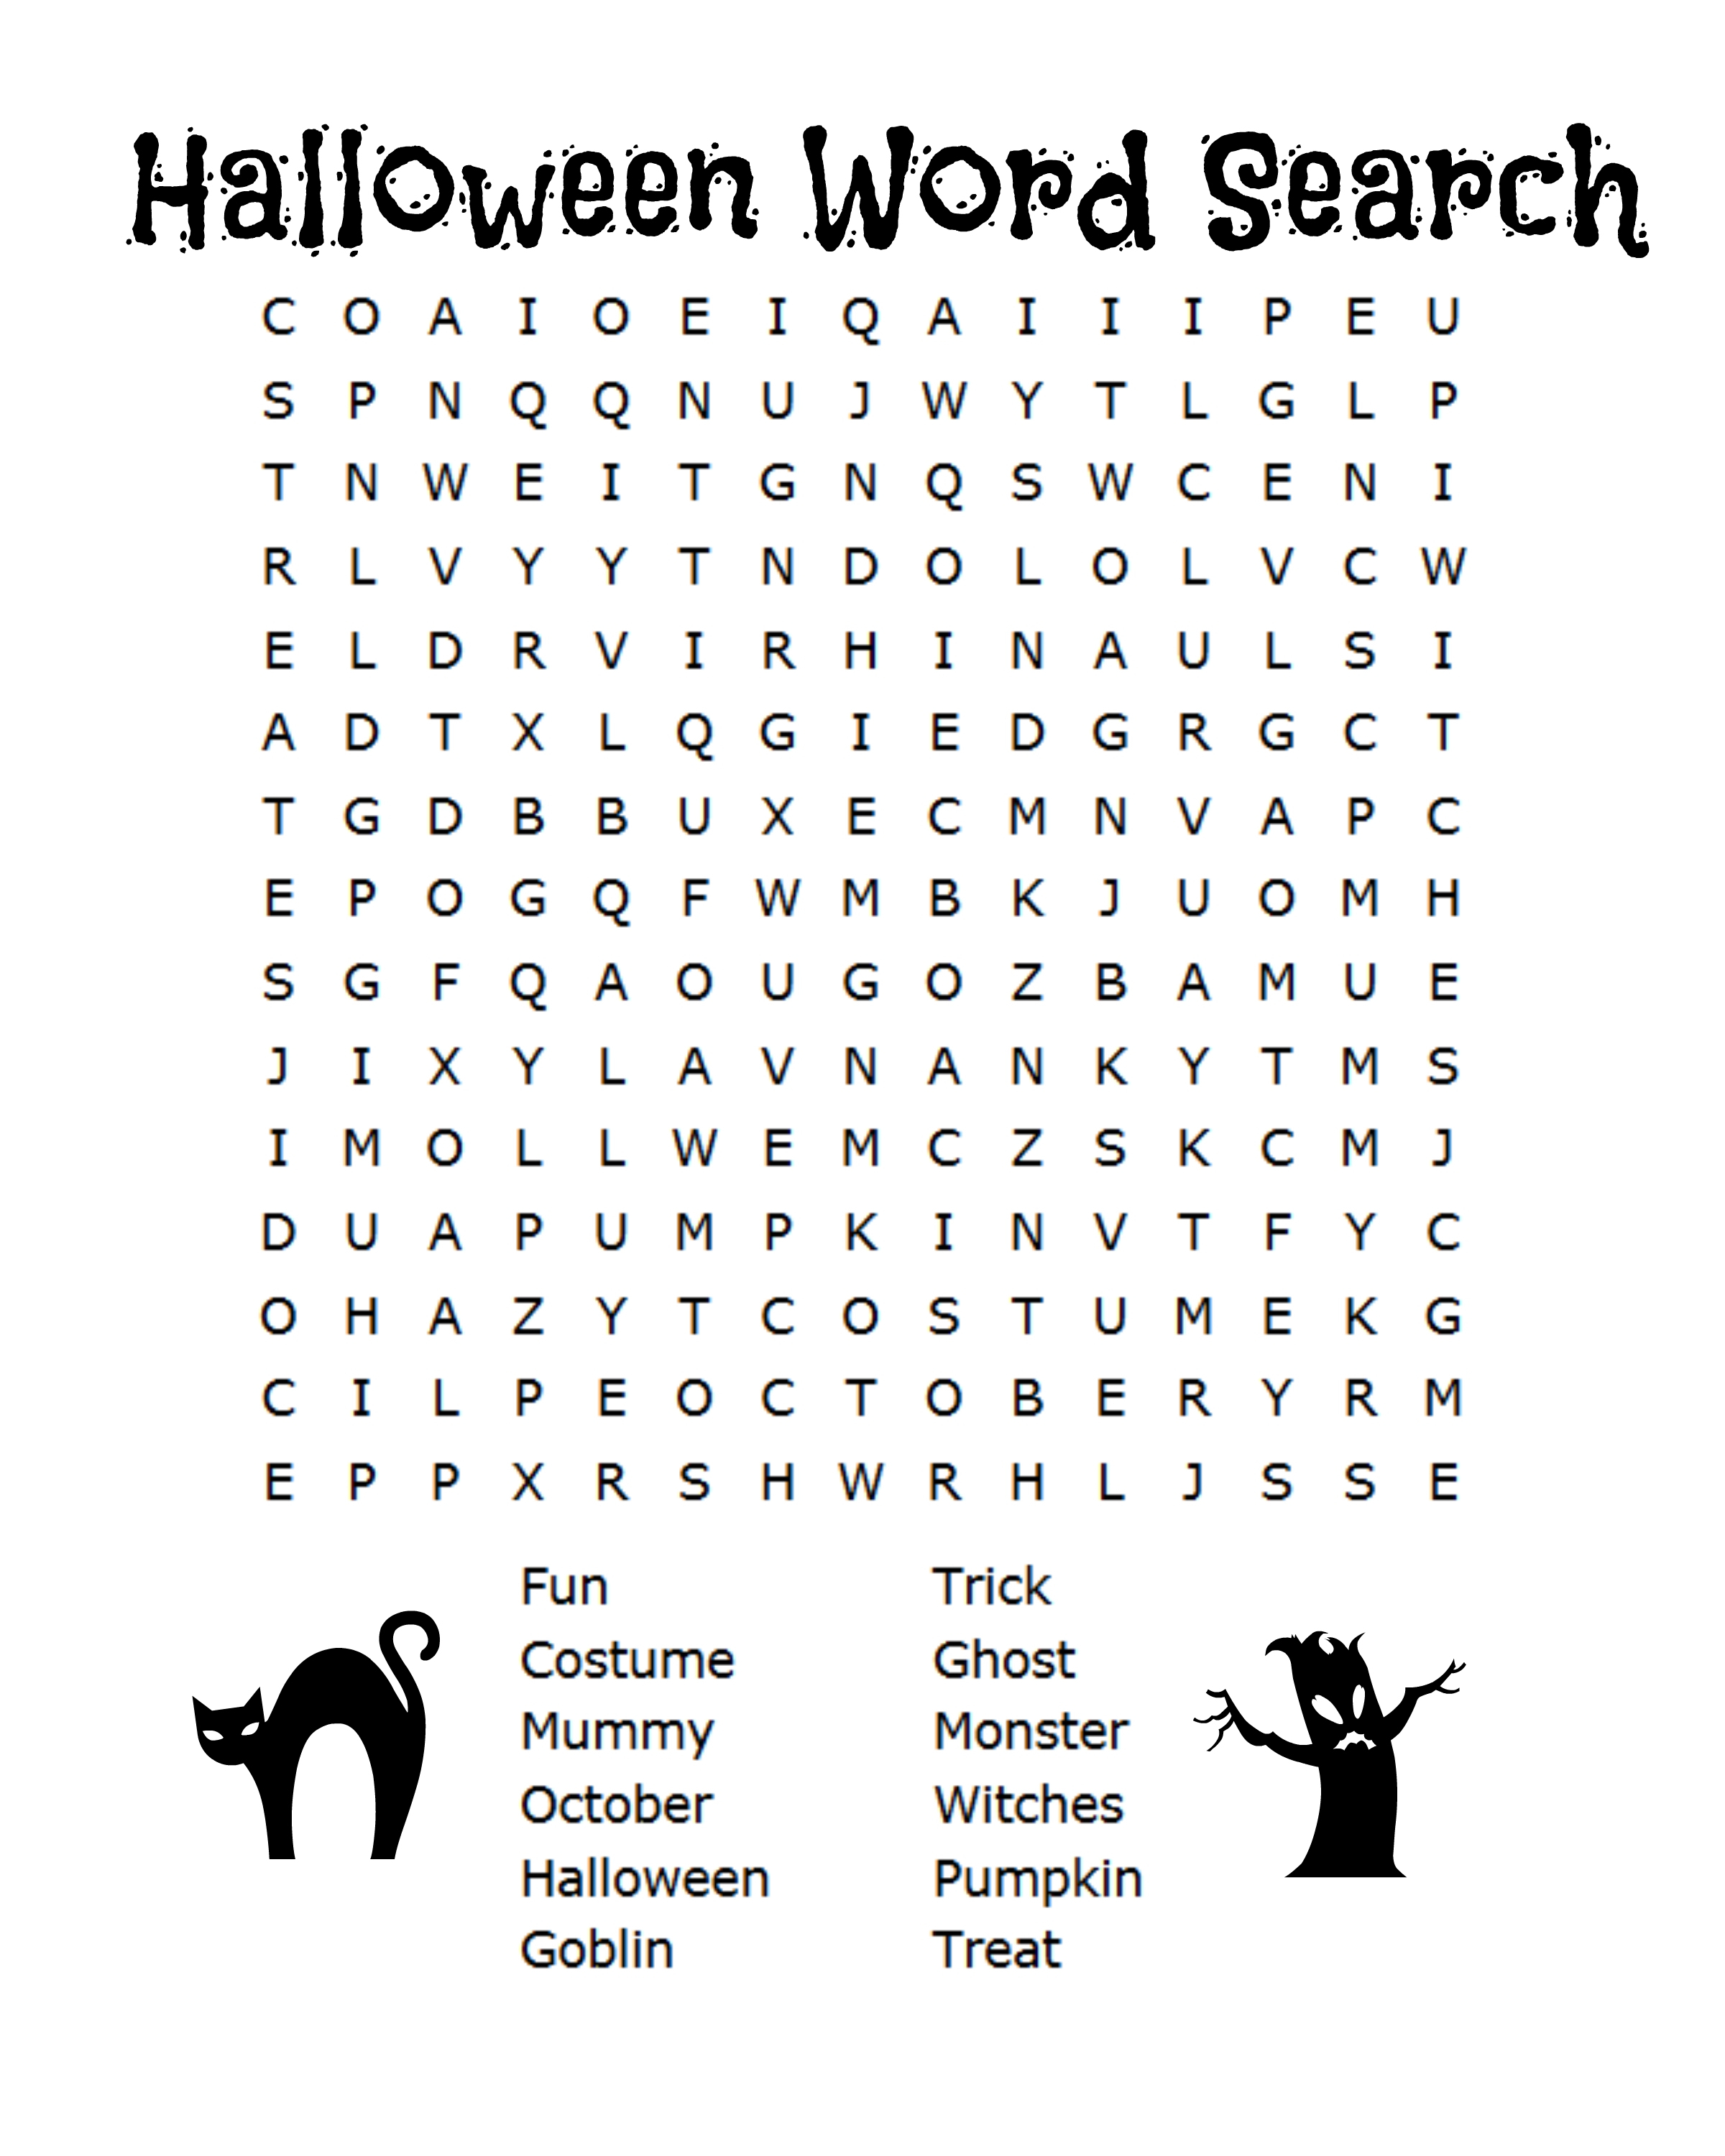 Free Printable Halloween Word Search Puzzle - 12.7.internist-Dr-Horn - Free Printable Halloween Word Search Puzzles